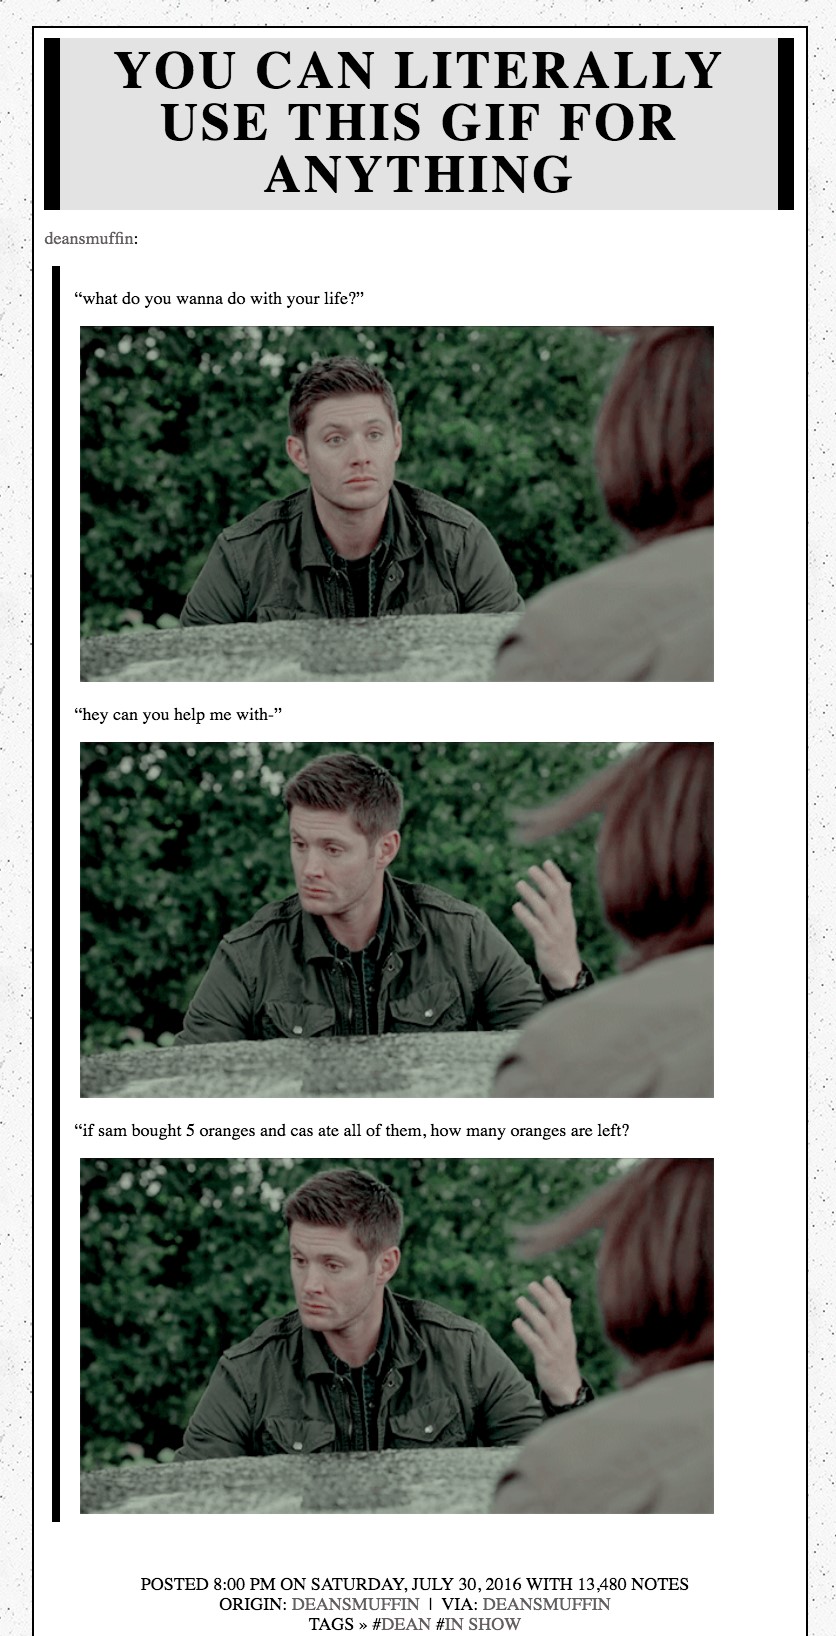 This post is titled 'You Can Literally Use This GIF for Anything.' The same GIF of Ackles as Dean, looking from straight ahead to down to the right while gesturing with his left hand appears three times with three different captions. The first caption reads 'What do you wanna do with your life?' The second reads 'hey can you help me with—' The third is 'if sam bought 5 oranges and cas ate all of them, how many oranges are left?'